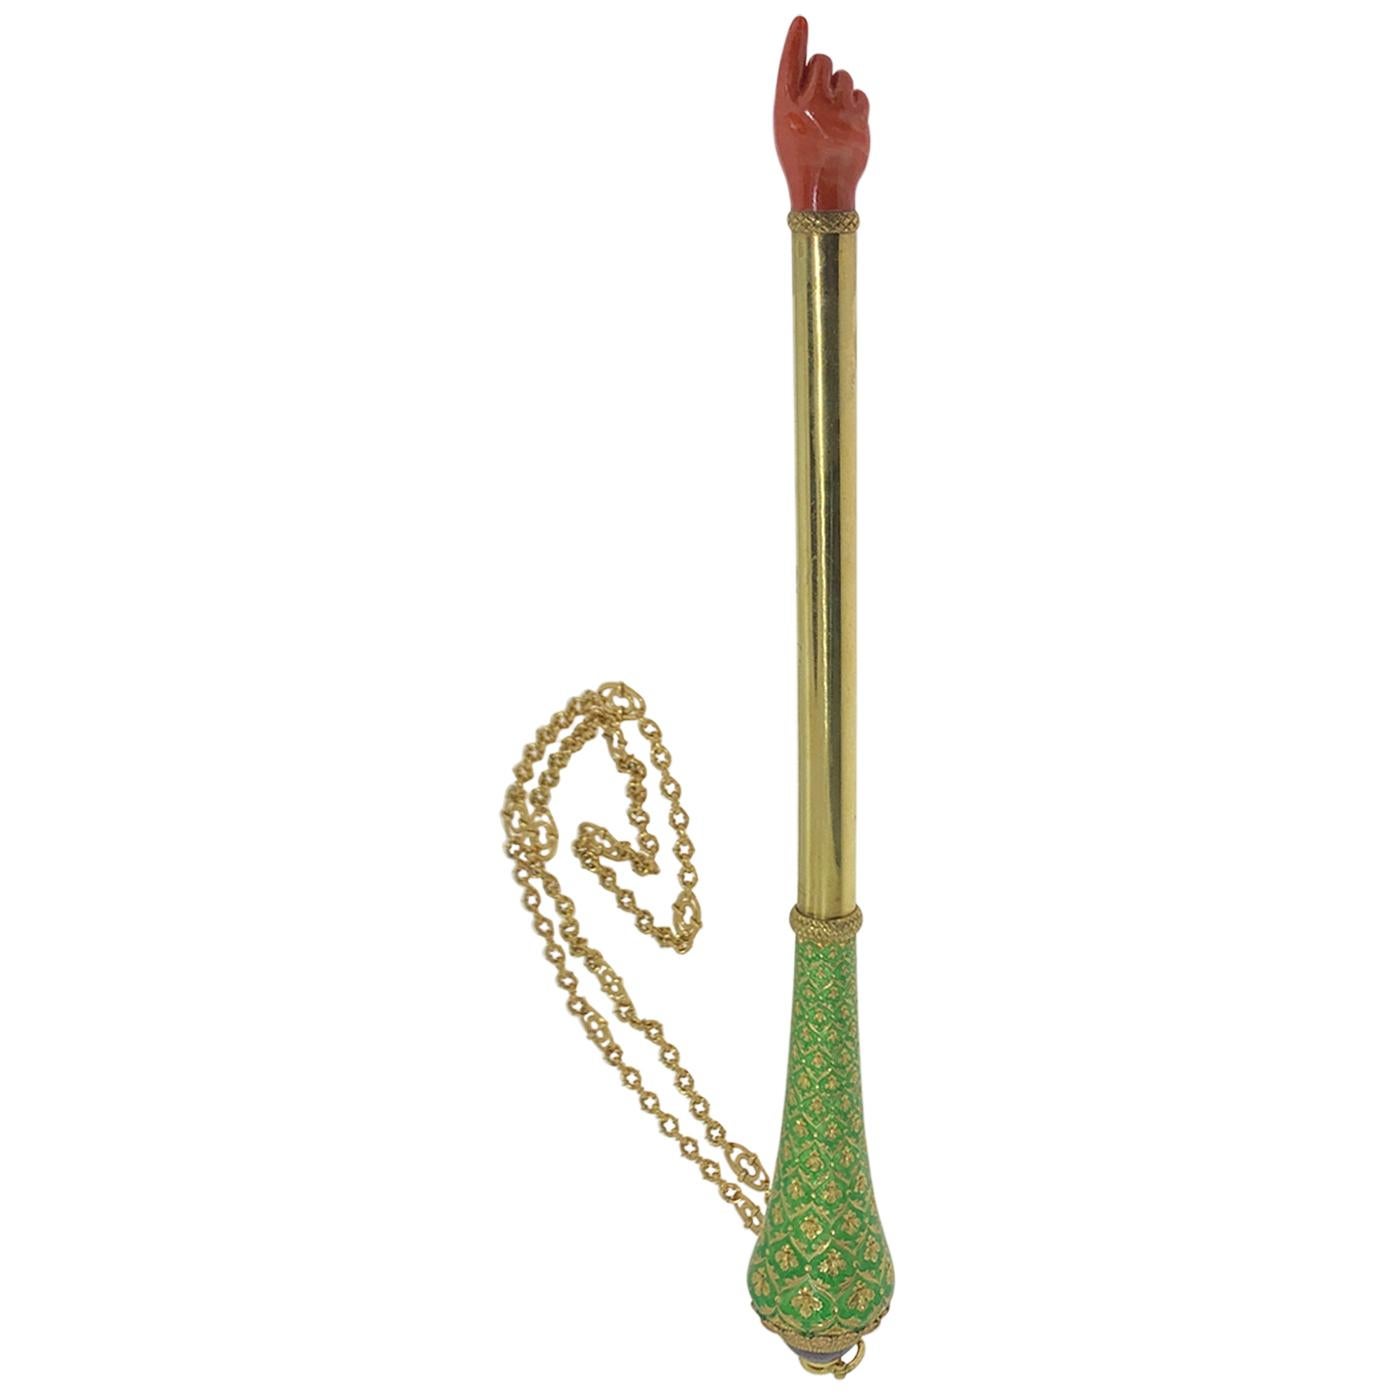 Extremely Rare Gold and Enamel Torah Pointer